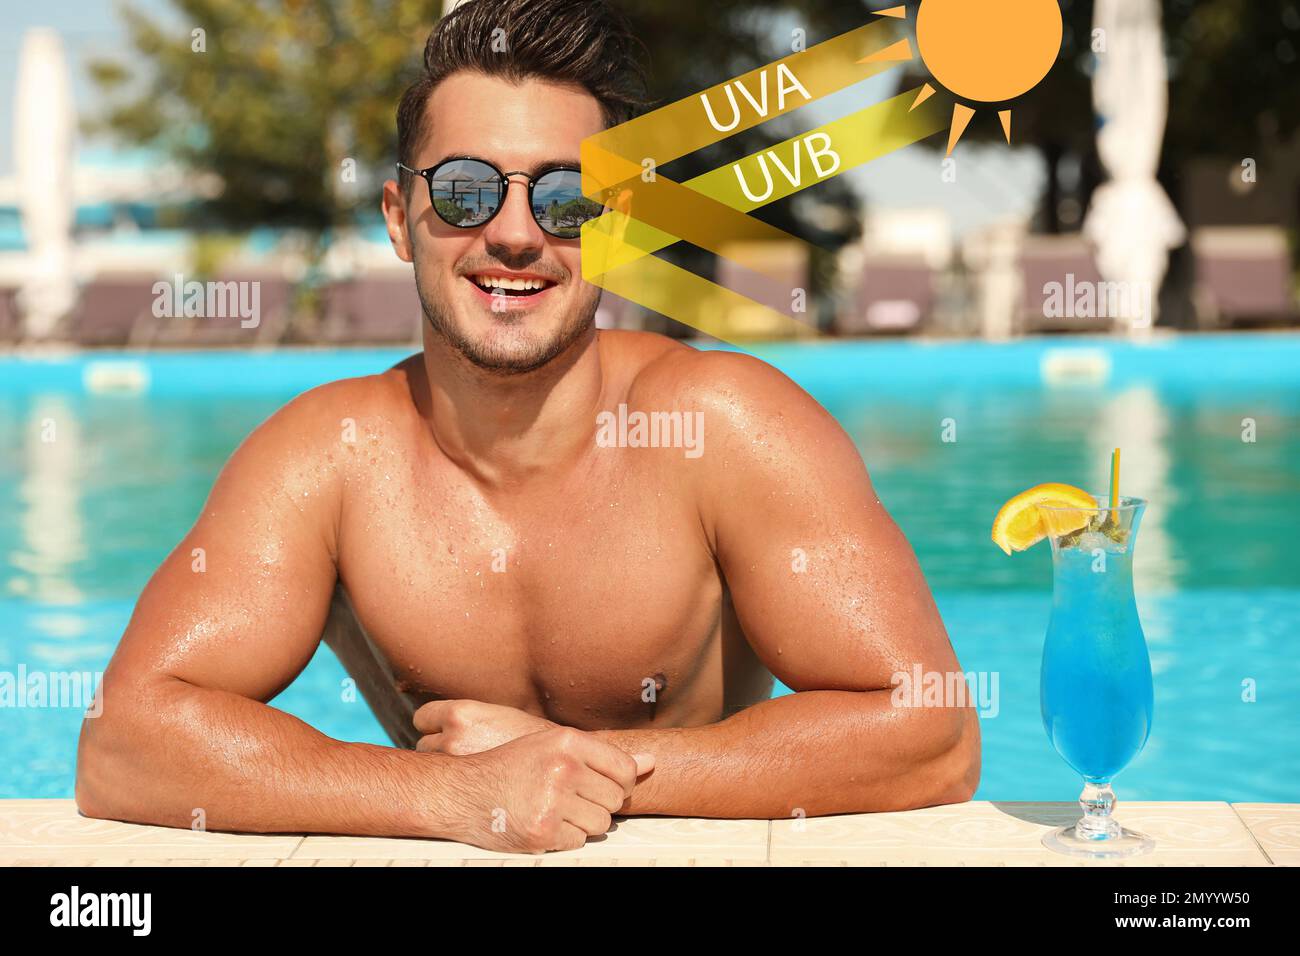 Man wearing sunglasses in outdoor swimming pool. UVA and UVB rays reflected  by lenses, illustration Stock Photo - Alamy